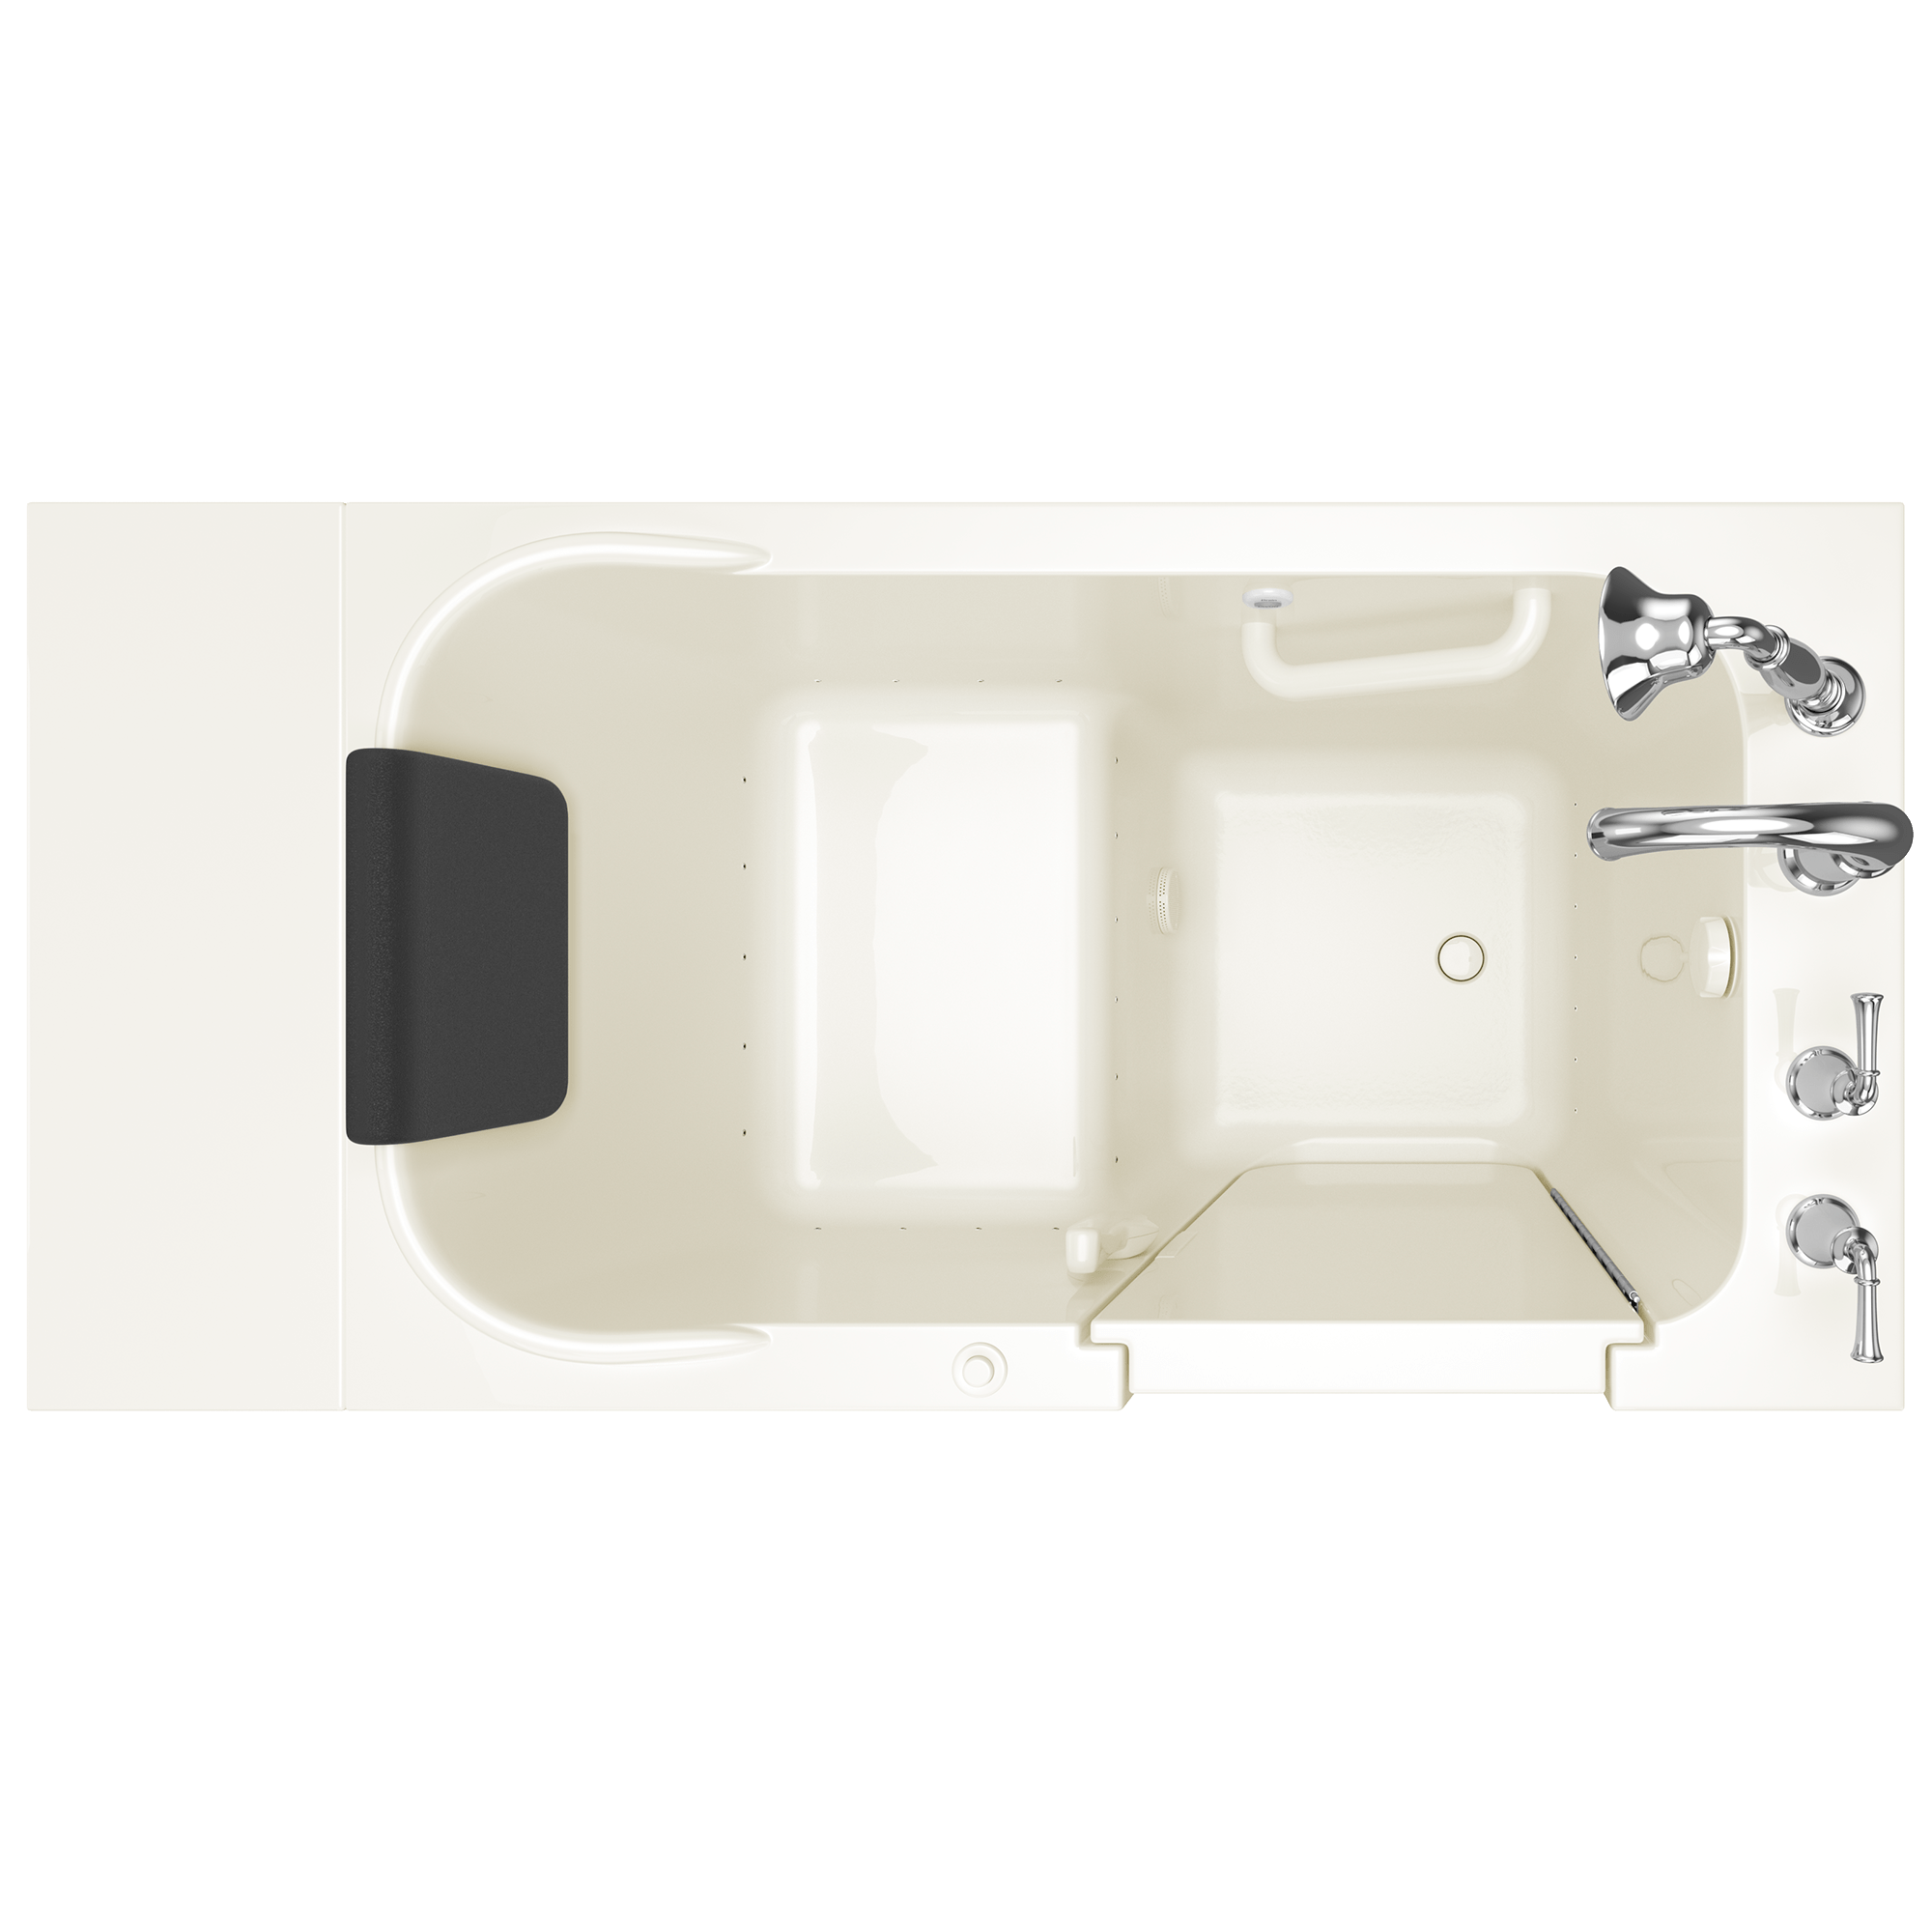 Gelcoat Premium Series 48x28 Inch Walk In Bathtub with Air Massage System   Right Hand Door and Drain ST BISCUIT